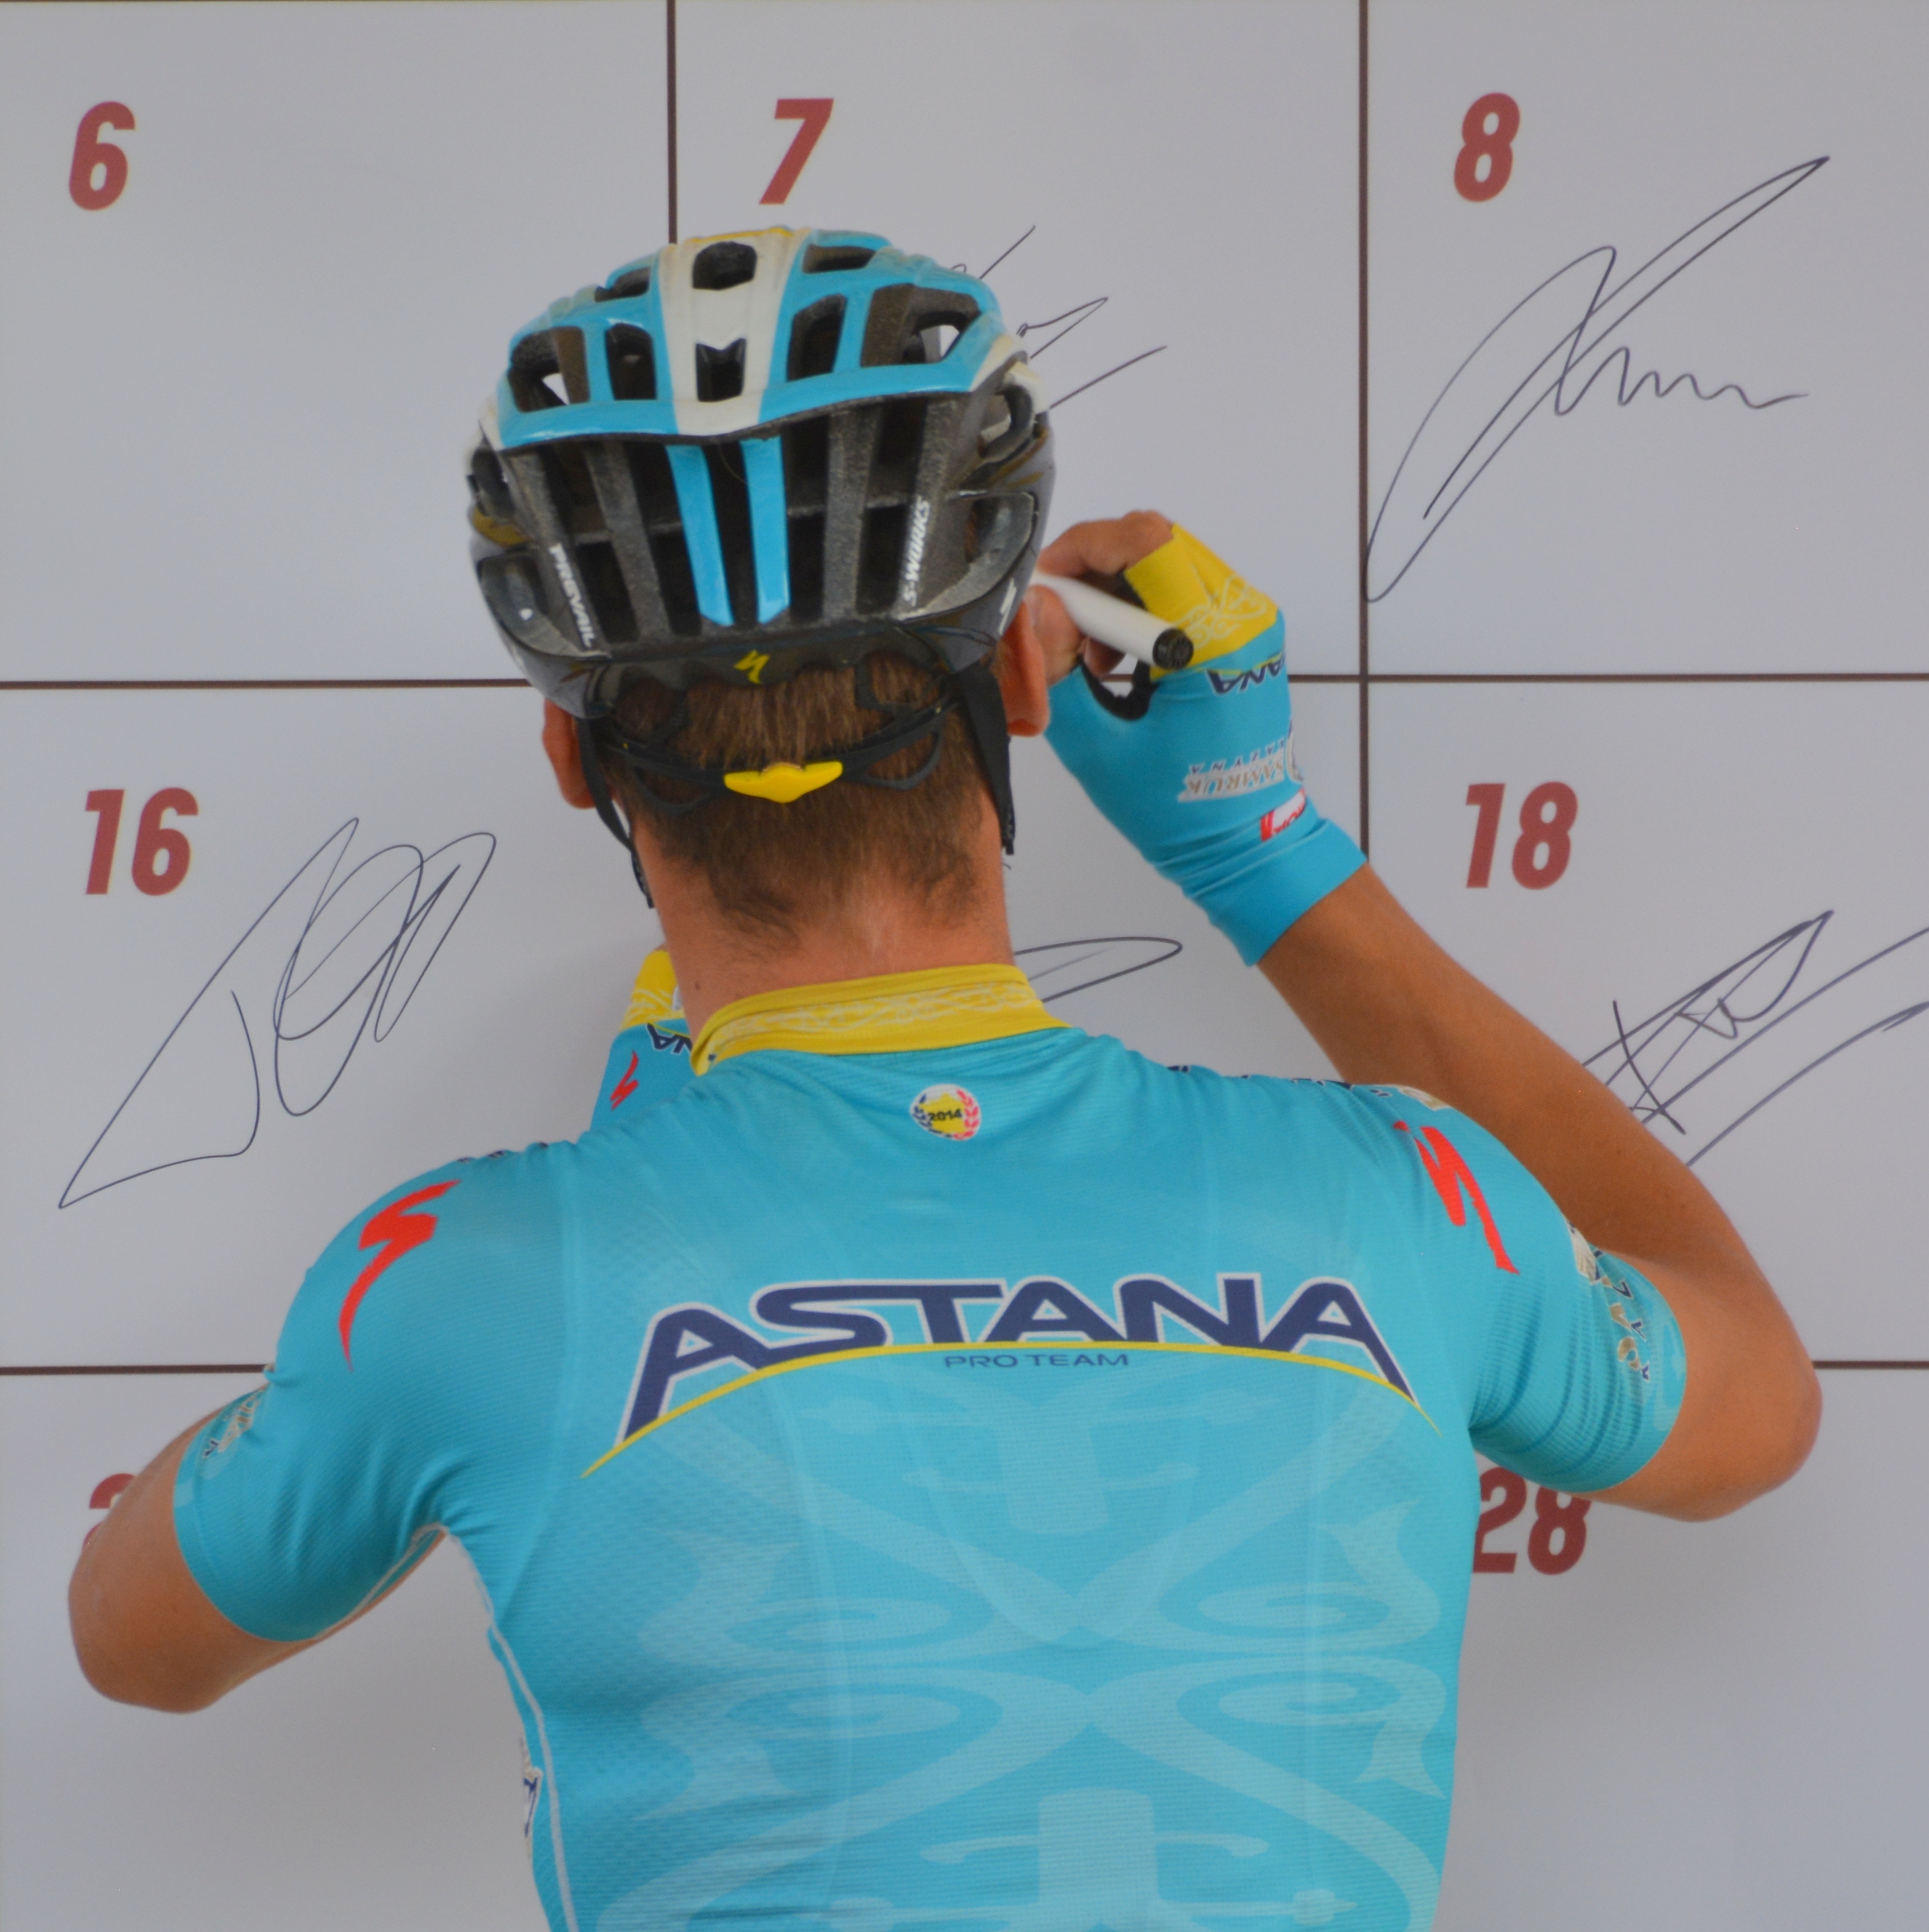 man's teal and yellow astana bicycle suit